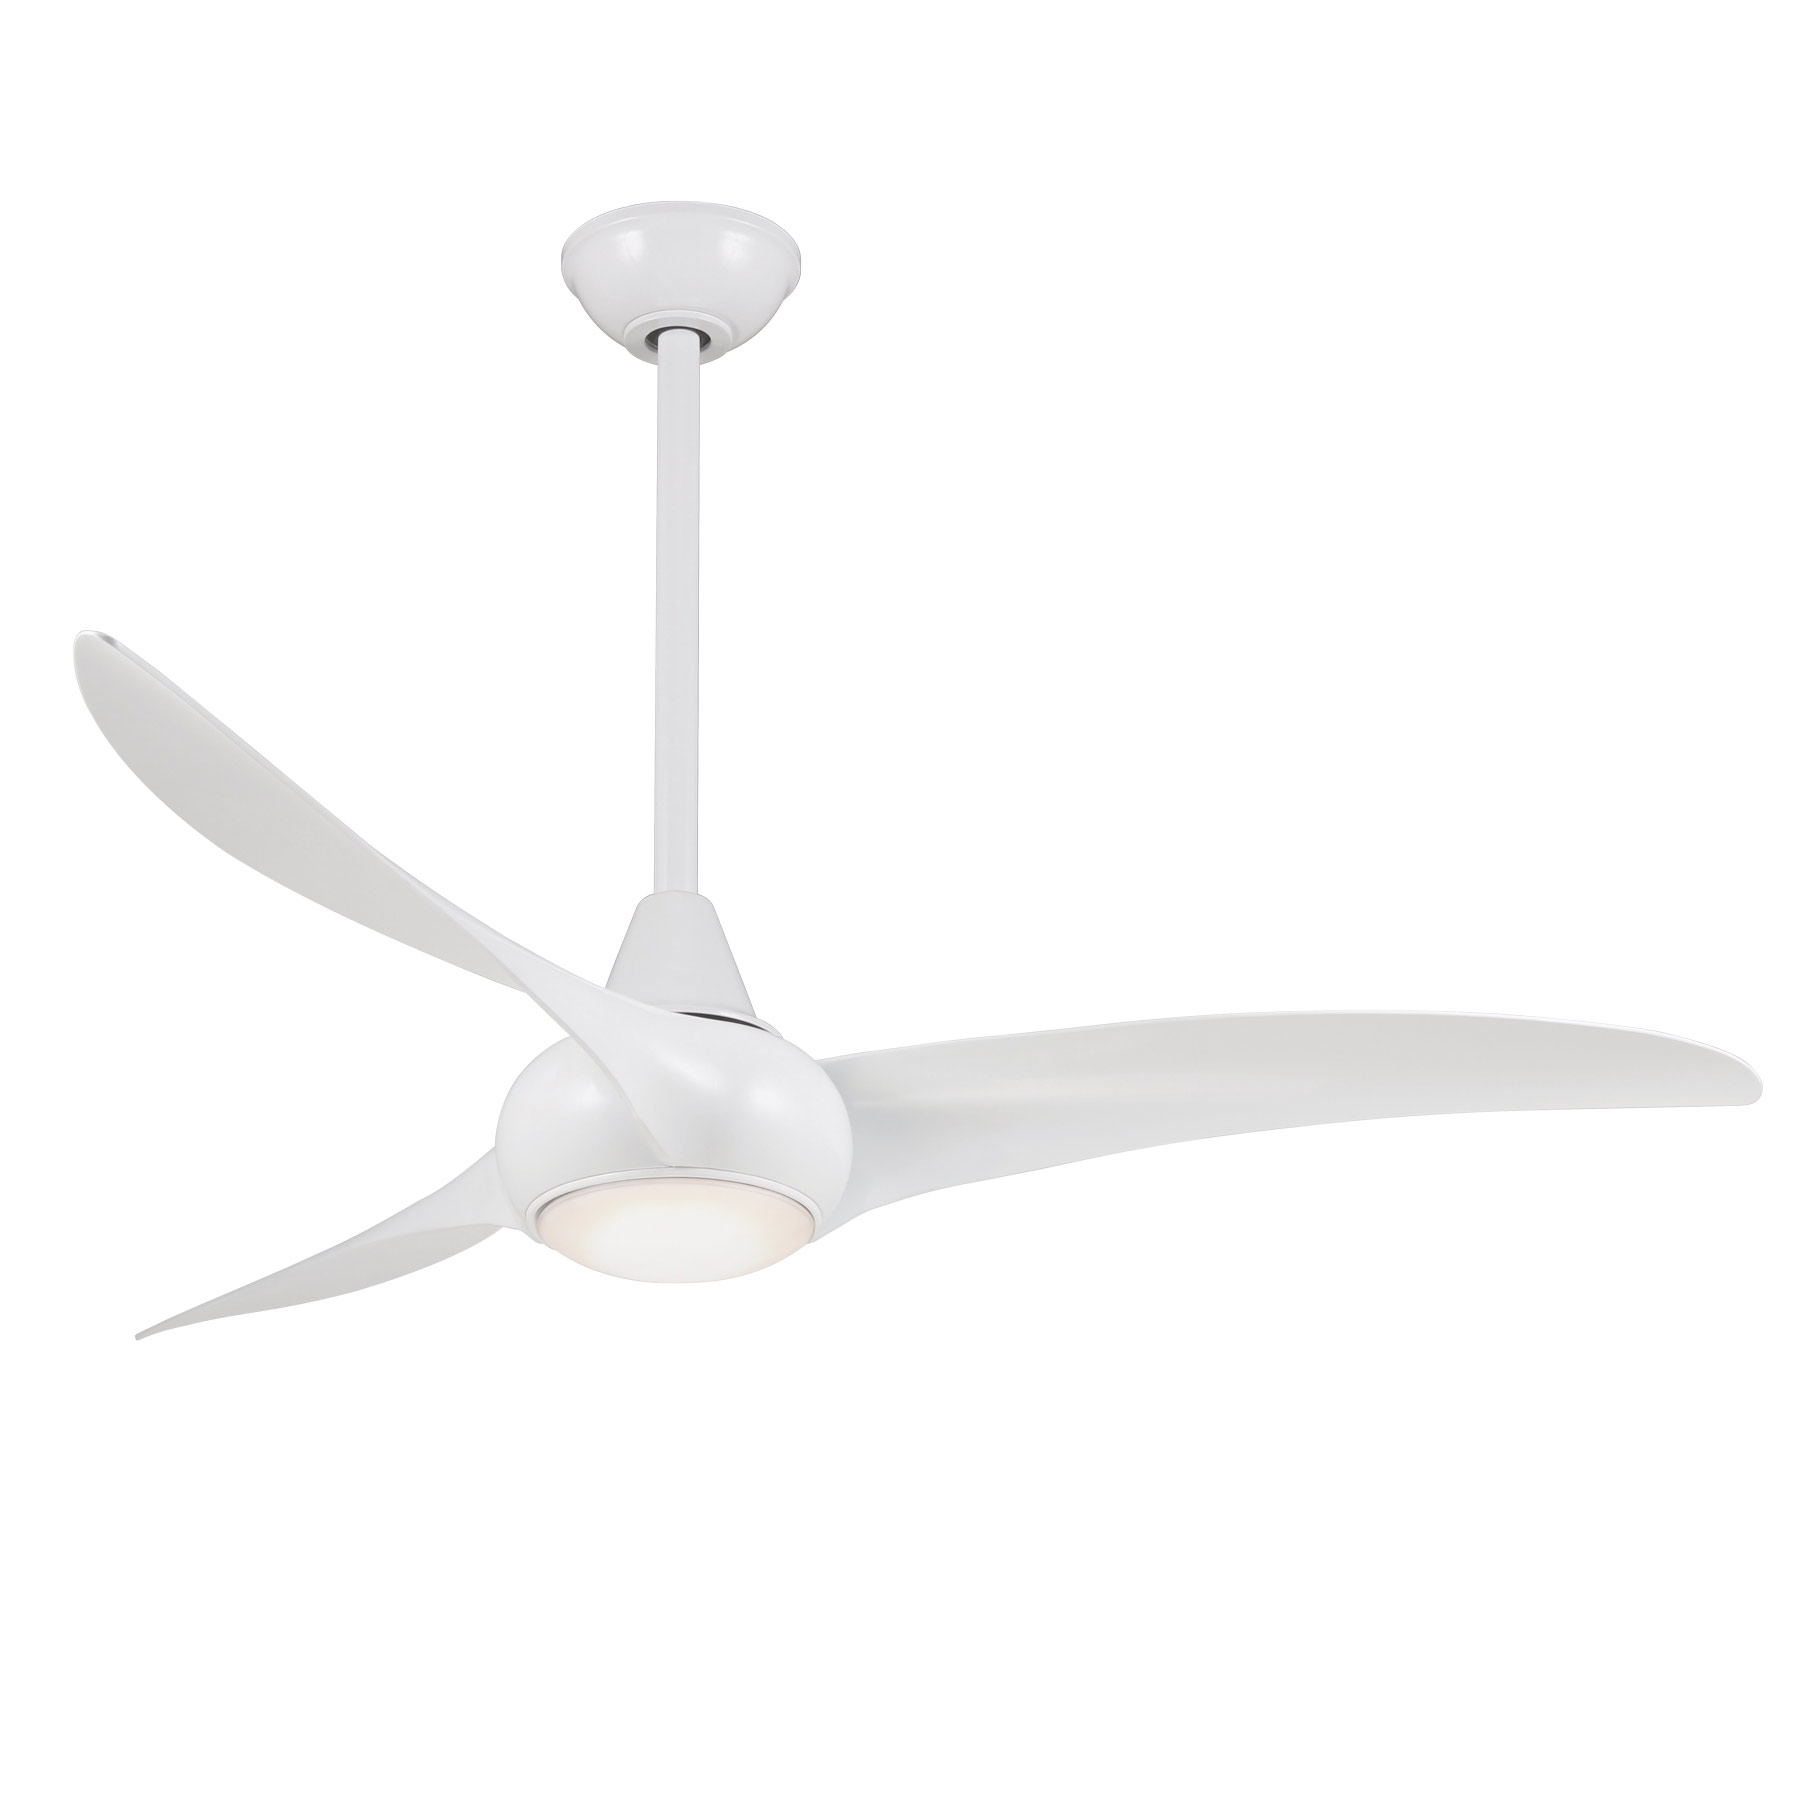 Light Wave Ceiling Fan with Light by Minka Aire F844-WH MKA194770